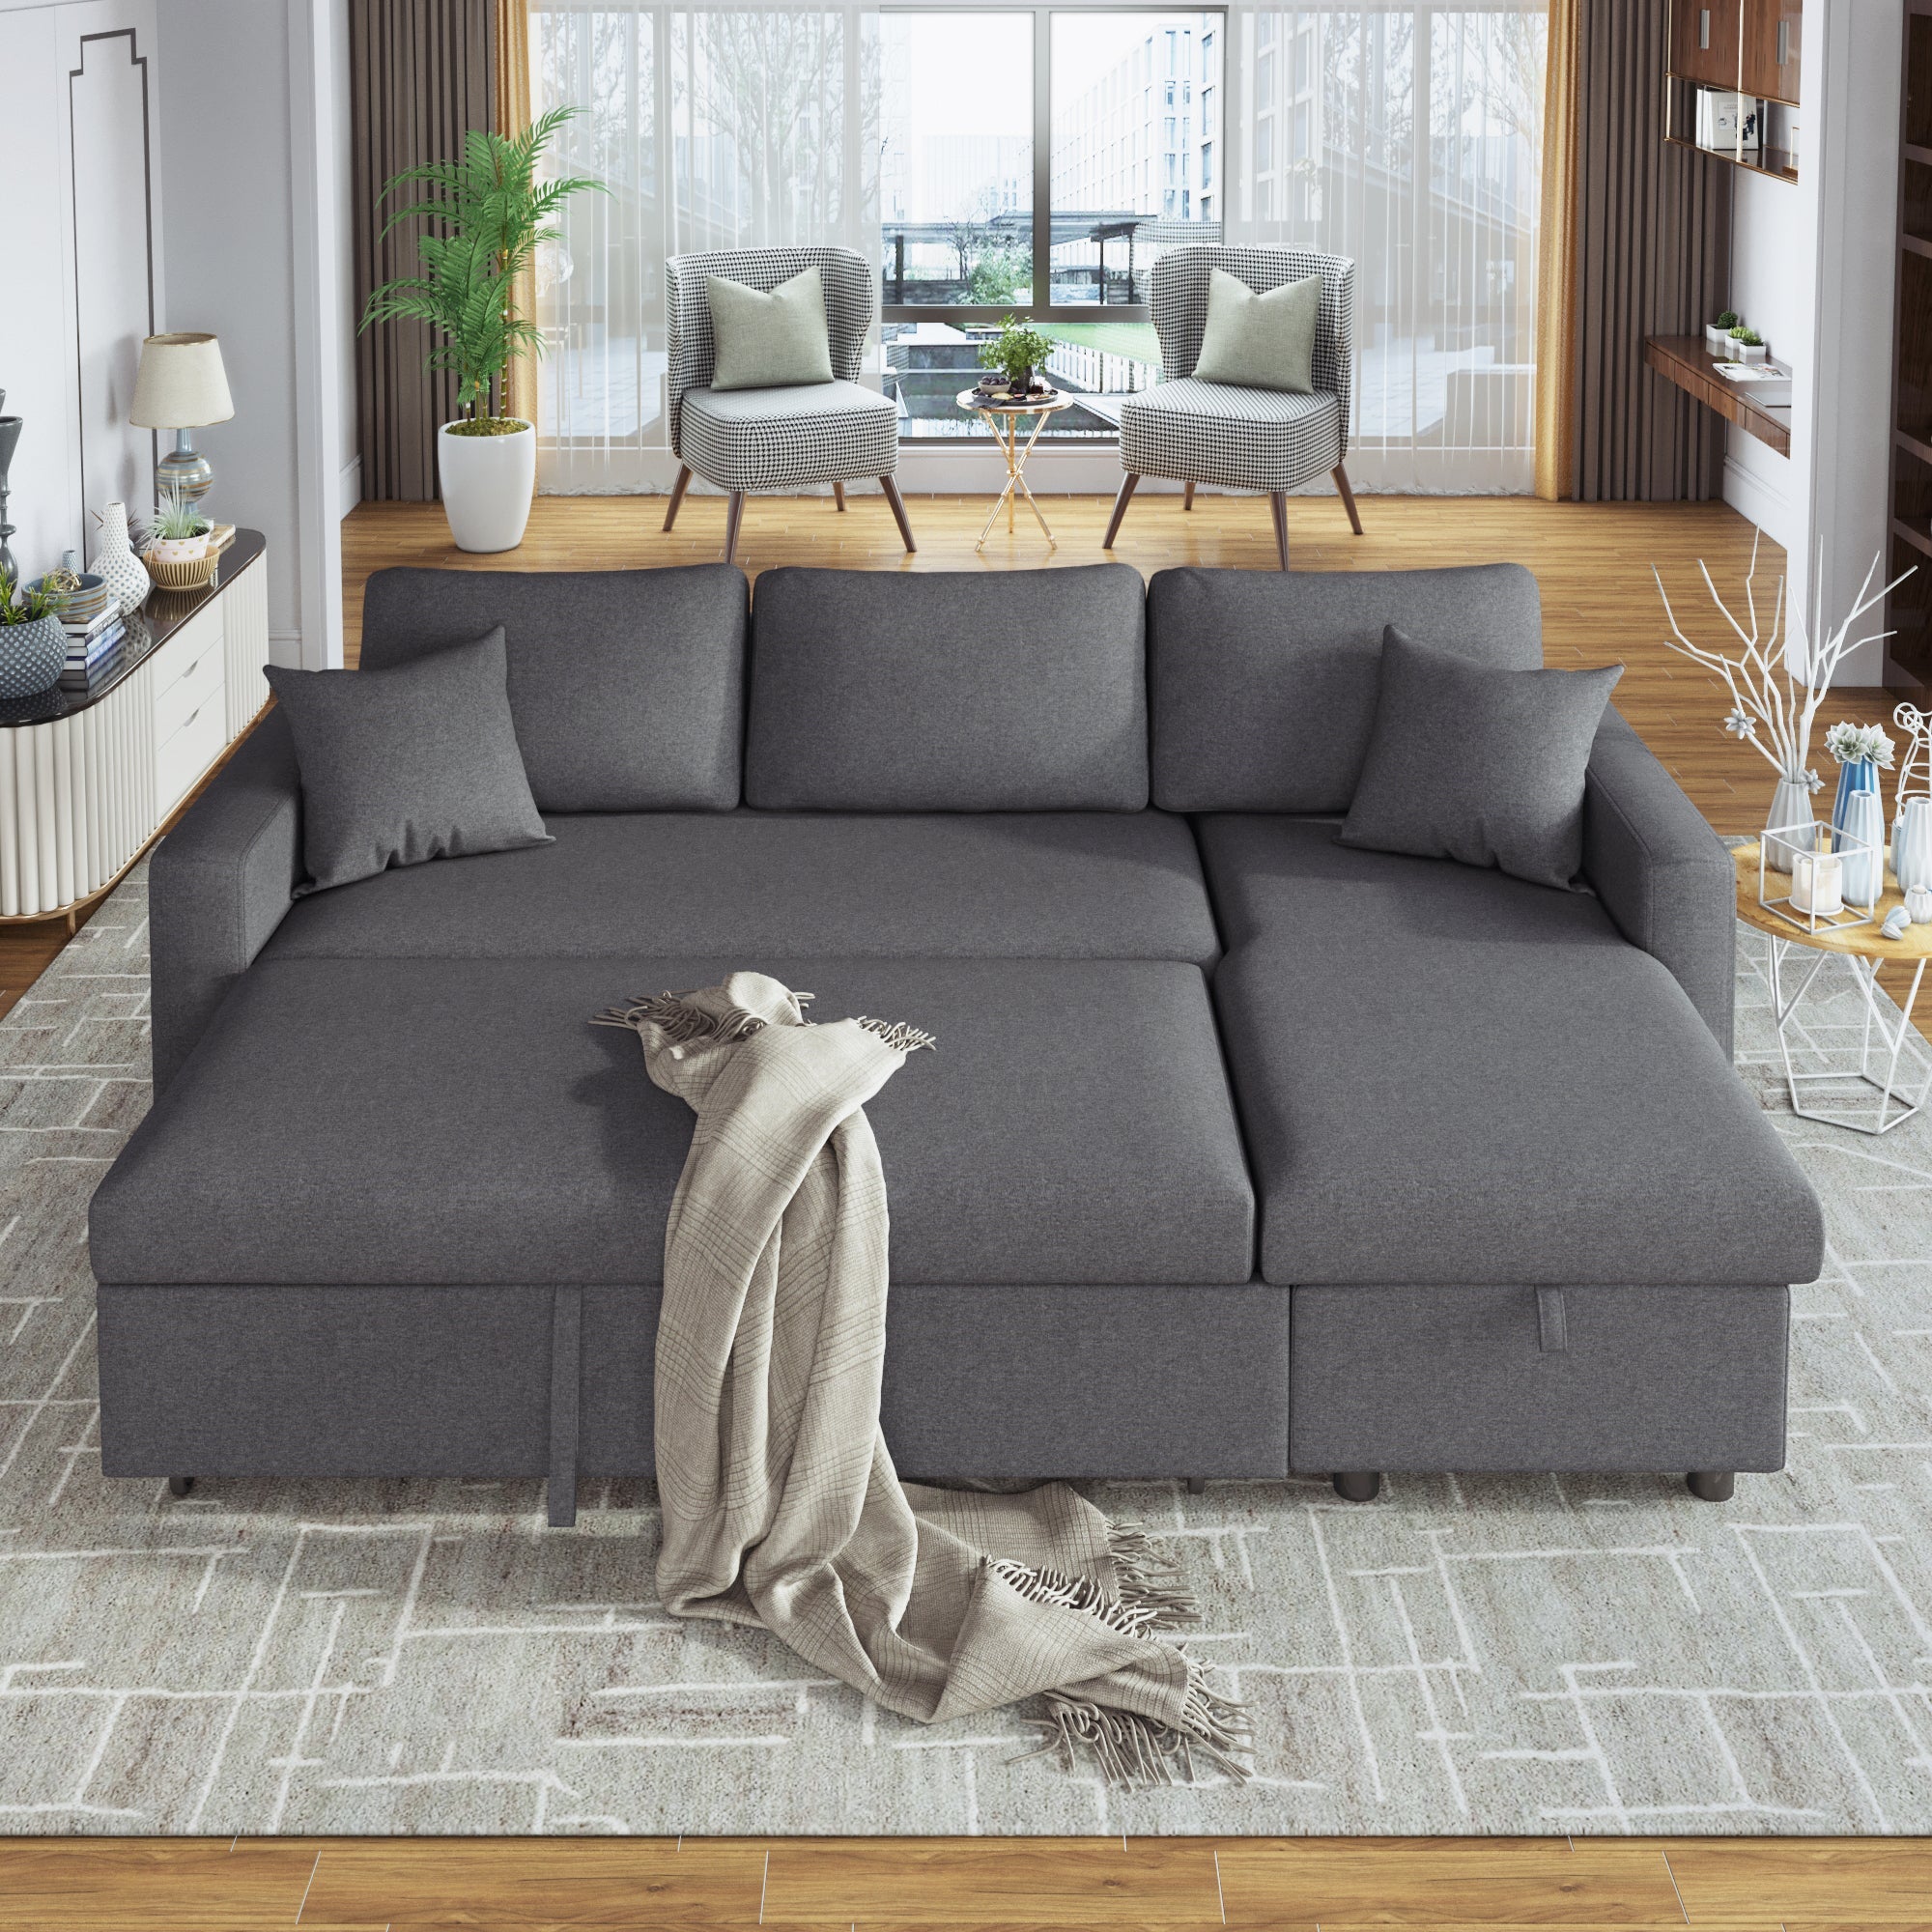 U-Style Upholstery Sleeper Sectional Sofa in Grey with Storage Space, 2 Tossing Cushions | Stylish and Functional Addition to Your Living Space-Sleeper Sectionals-American Furniture Outlet